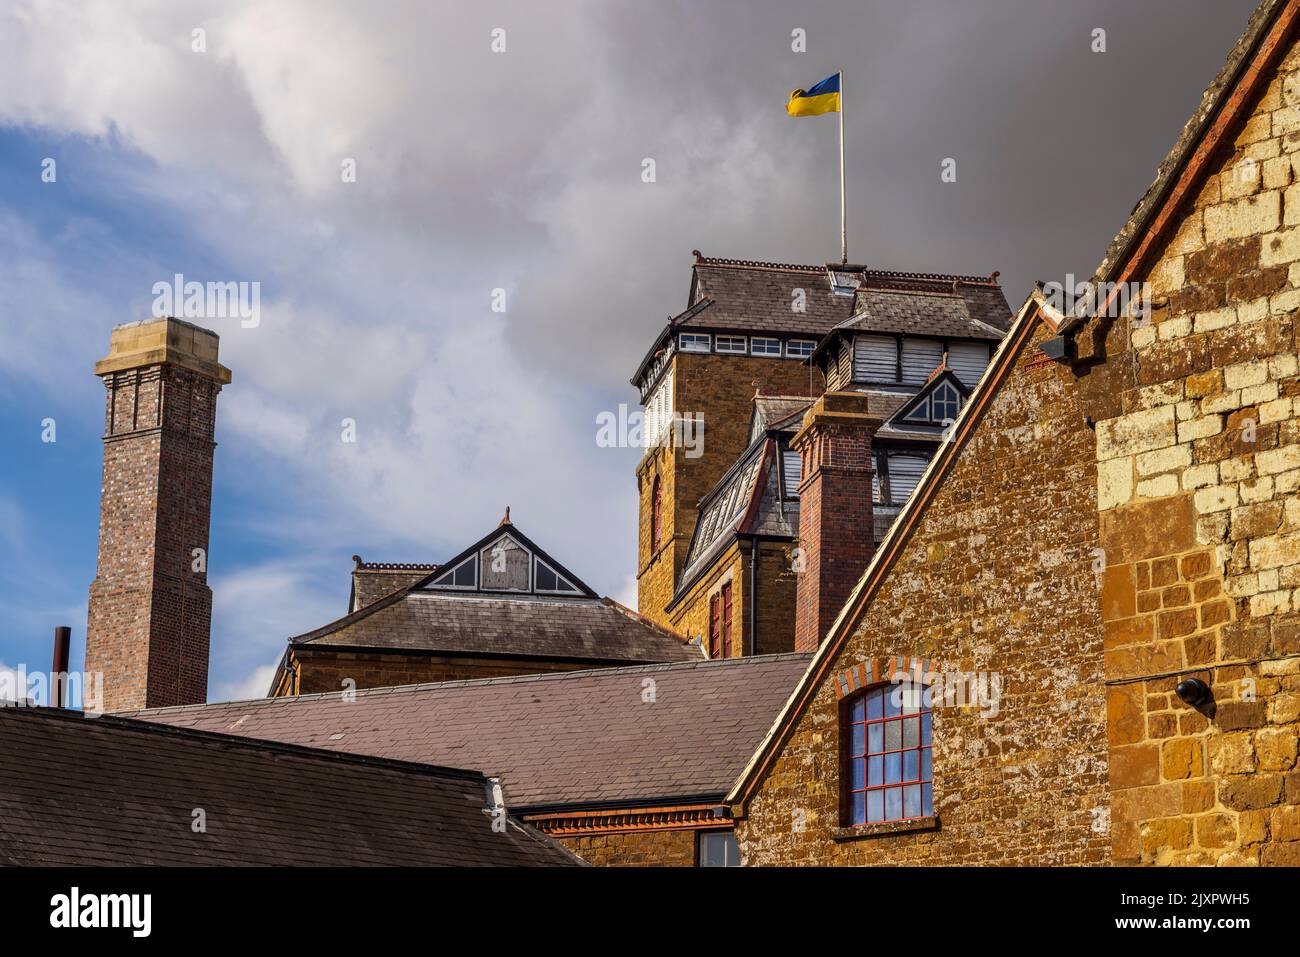 The Victorian Hook Norton Brewery buildings, Oxfordshire, England Stock Photo